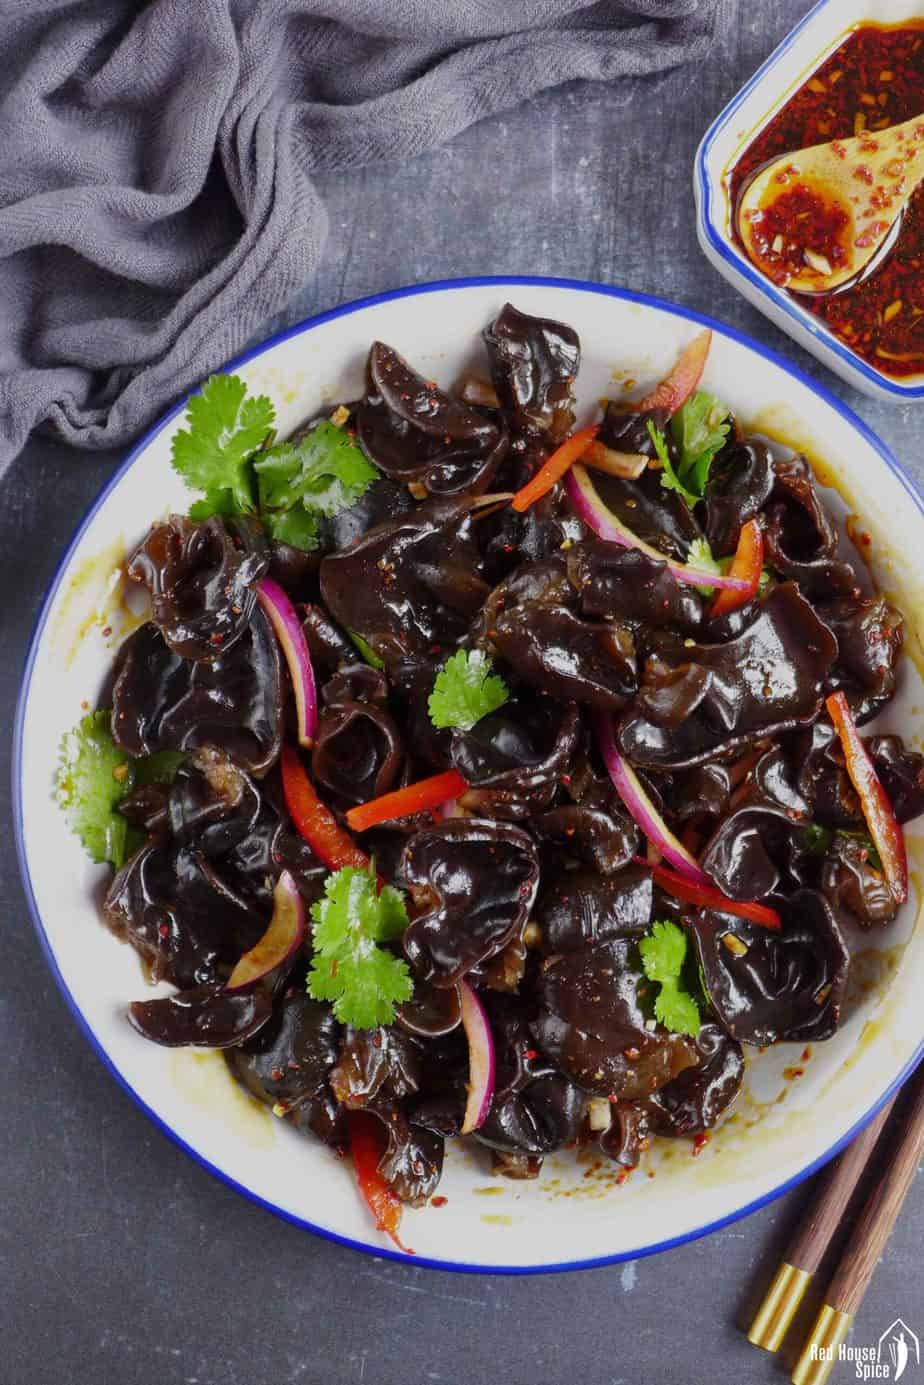 Chinese wood ear mushroom salad with a spicy dressing